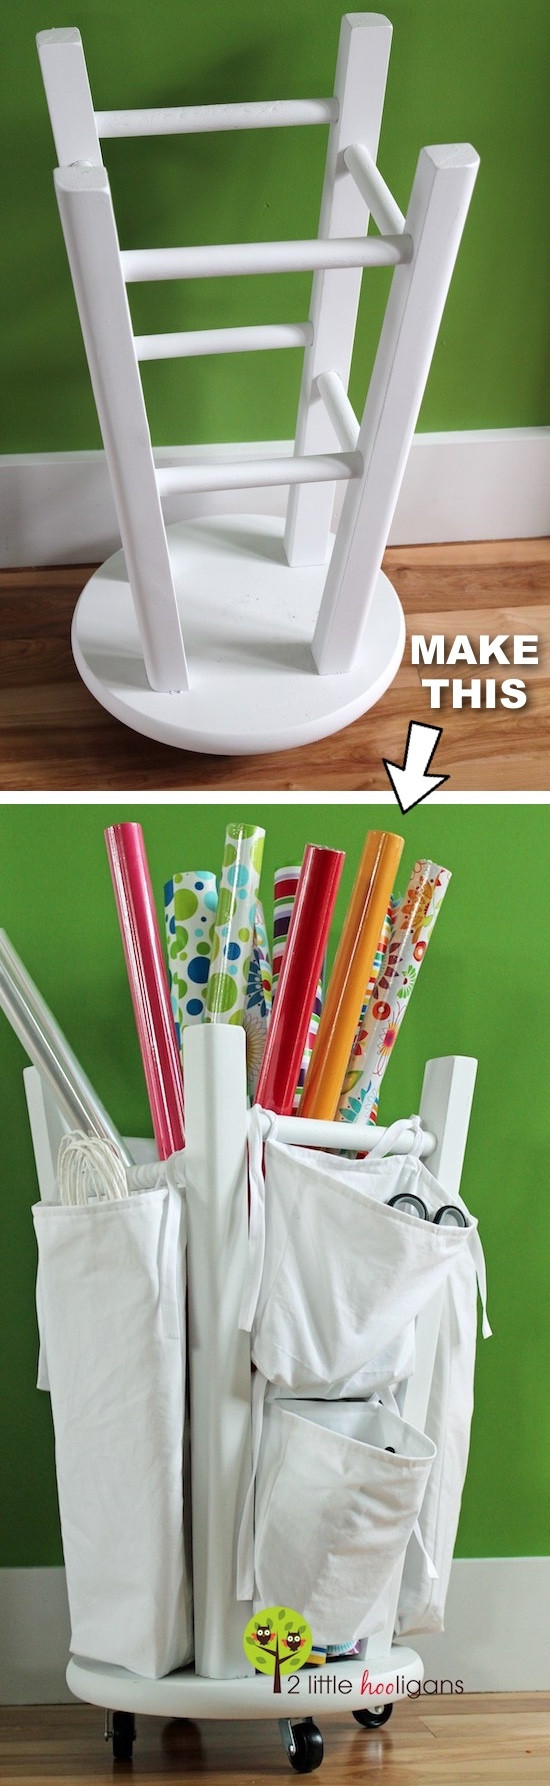 Paper Crafting Ideas For Adults
 30 Easy Craft Ideas That Will Spark Your Creativity DIY